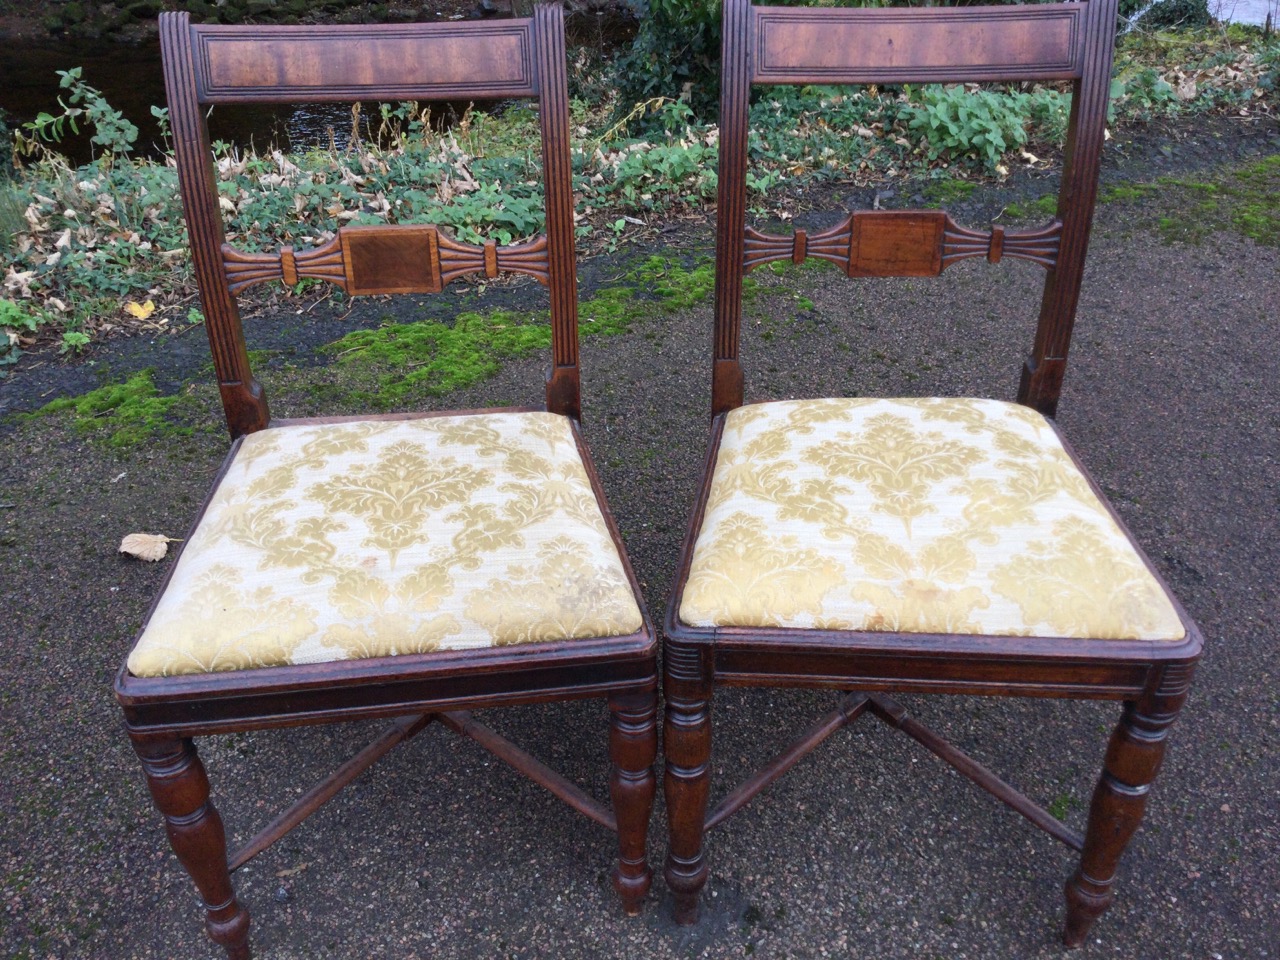 A near pair of nineteenth century mahogany dining chairs with tablet back rails framed by fluted